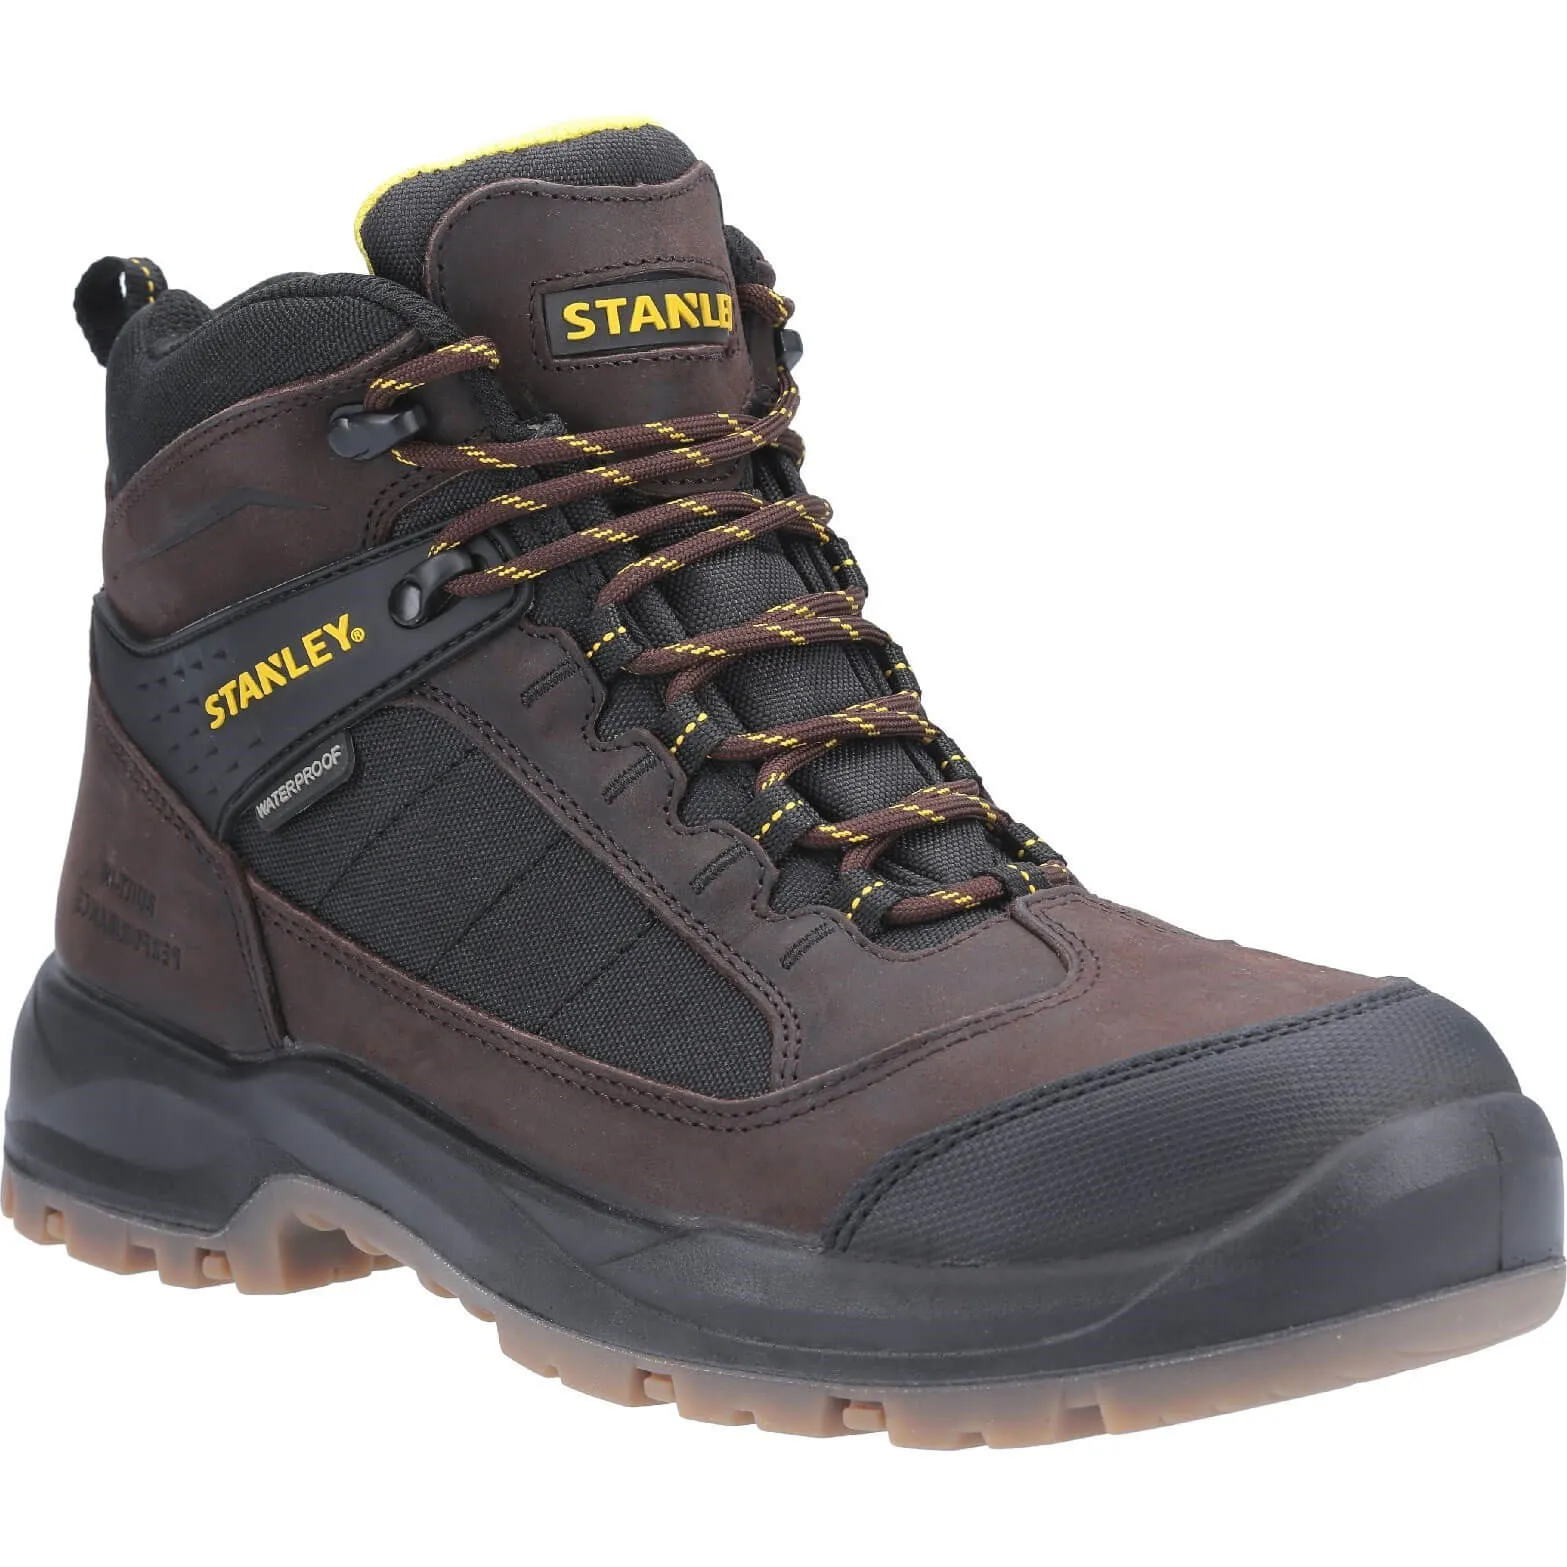 Stanley Berkeley Safety Boot - Brown, Size 8